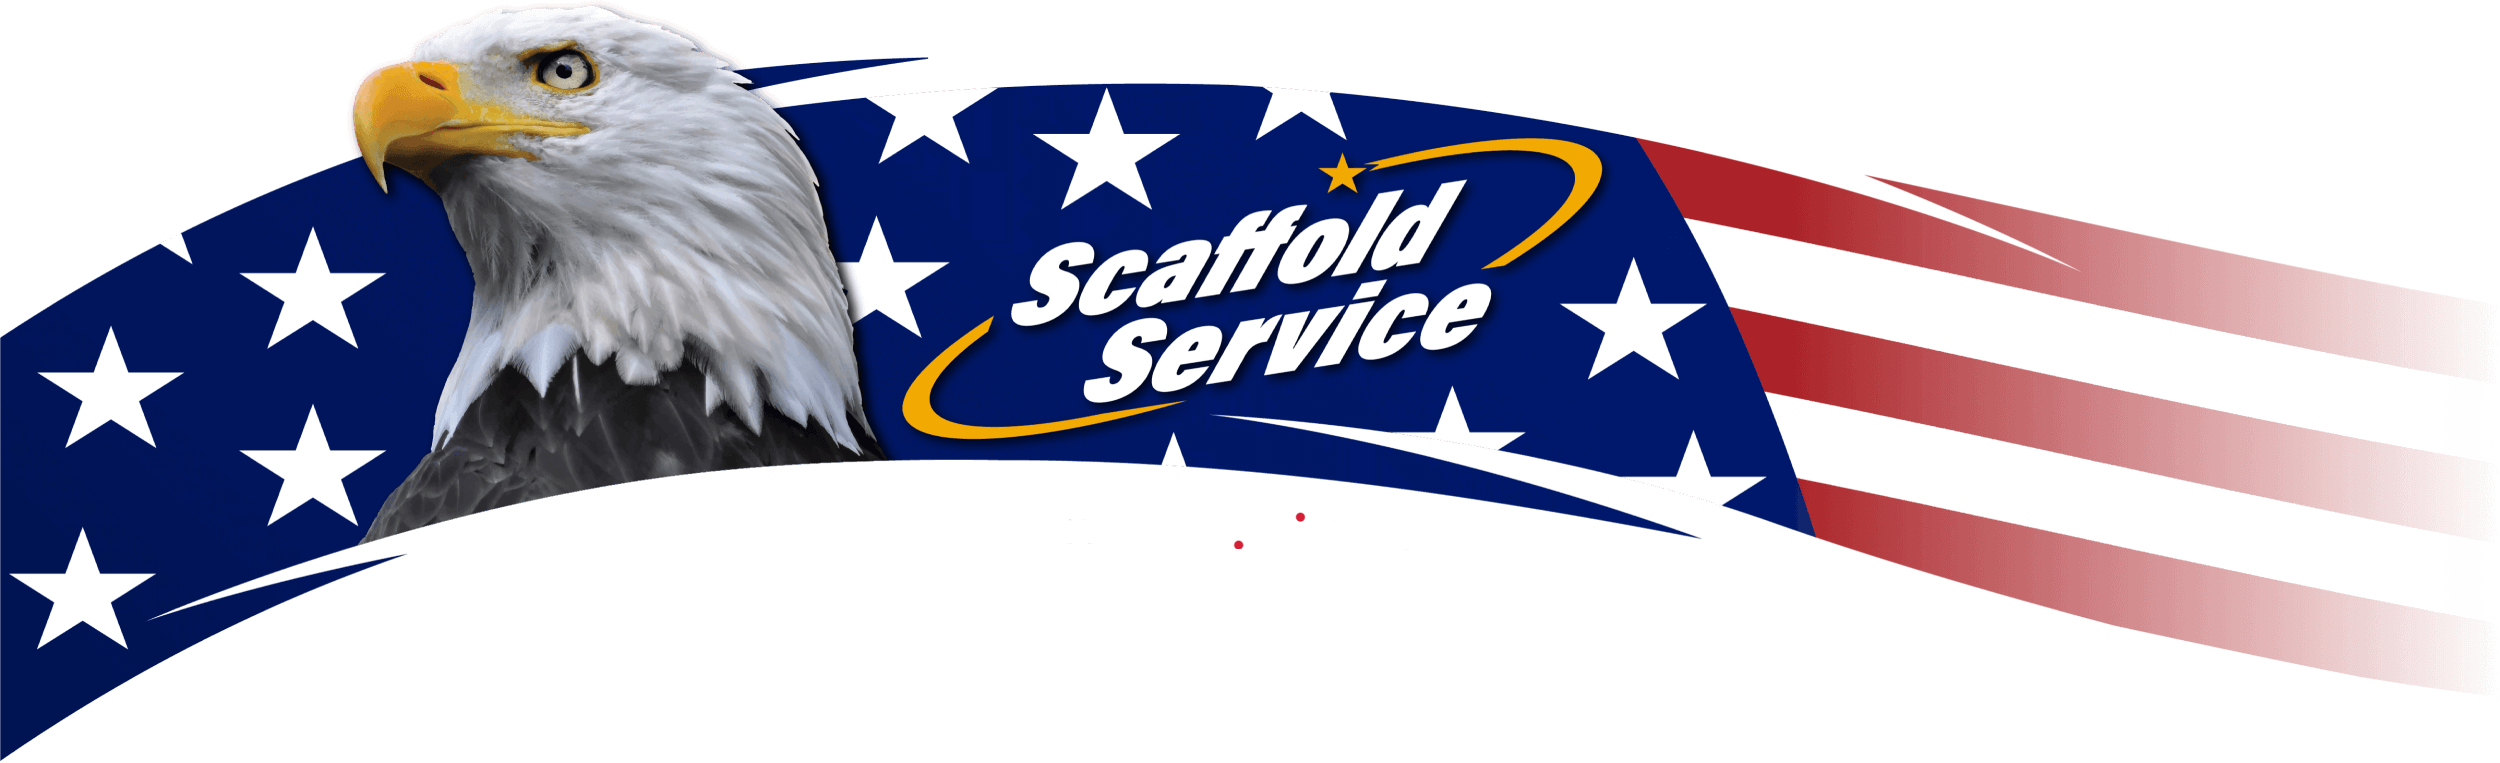 Scaffold Service Powered by API Group